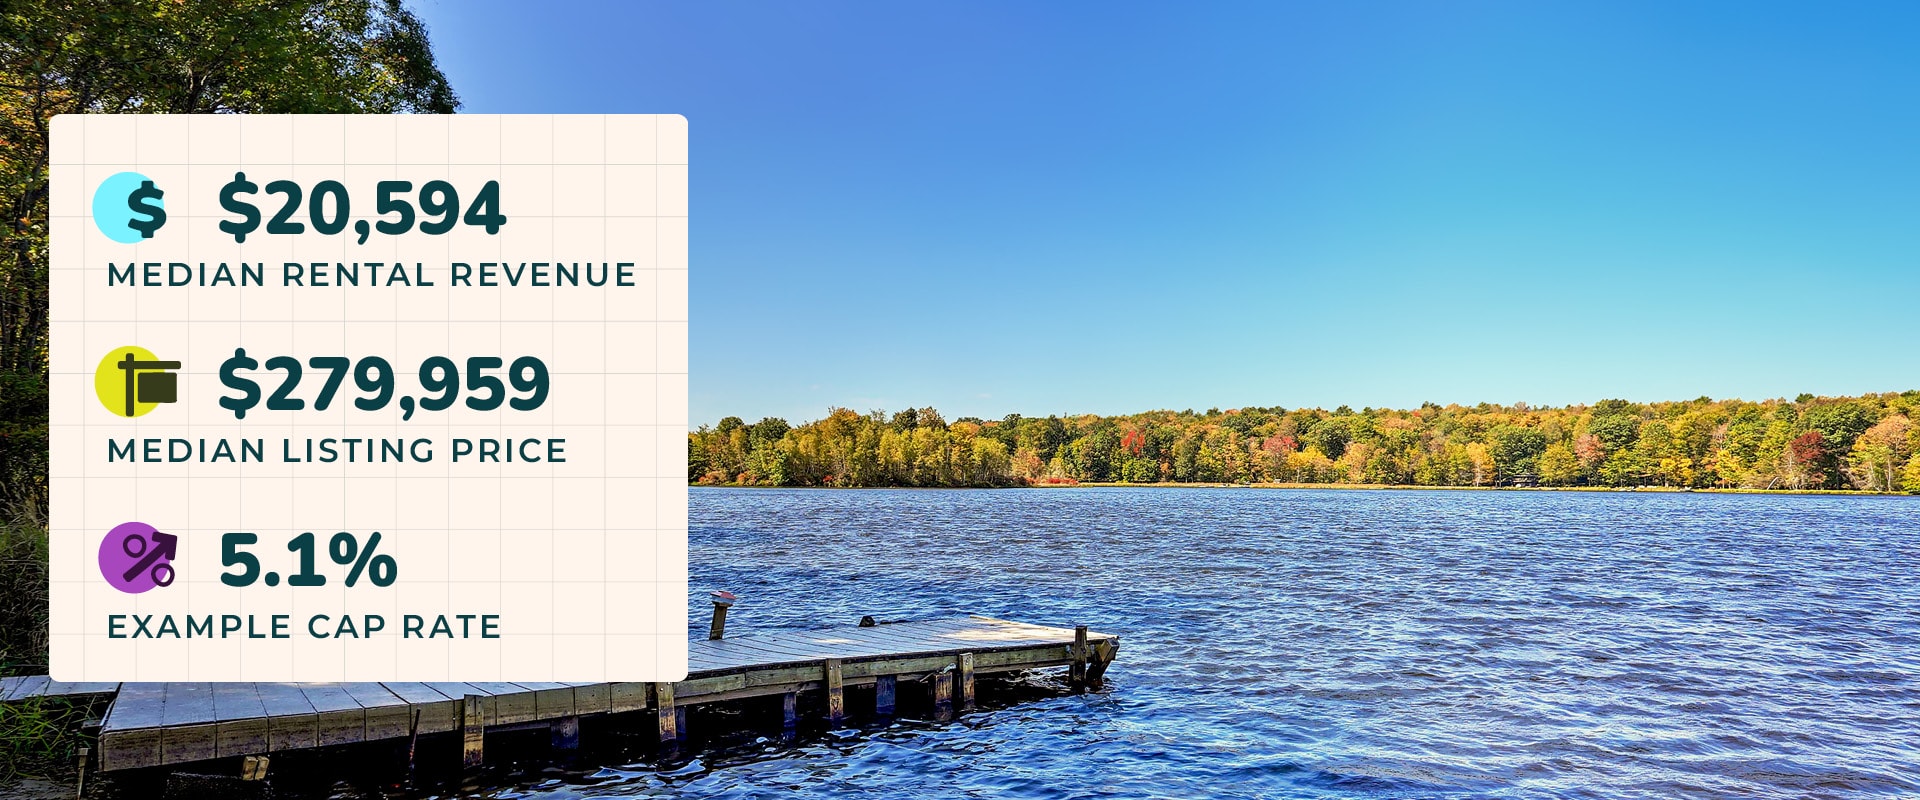 Photo of Pocono Lake, PA with a weathered dock jutting into the choppy blue waters, an early autumn forest on the distant shore. Image text reads, “$20,594 median rental revenue. $279,959 median listing price. 5.1% example cap rate.”